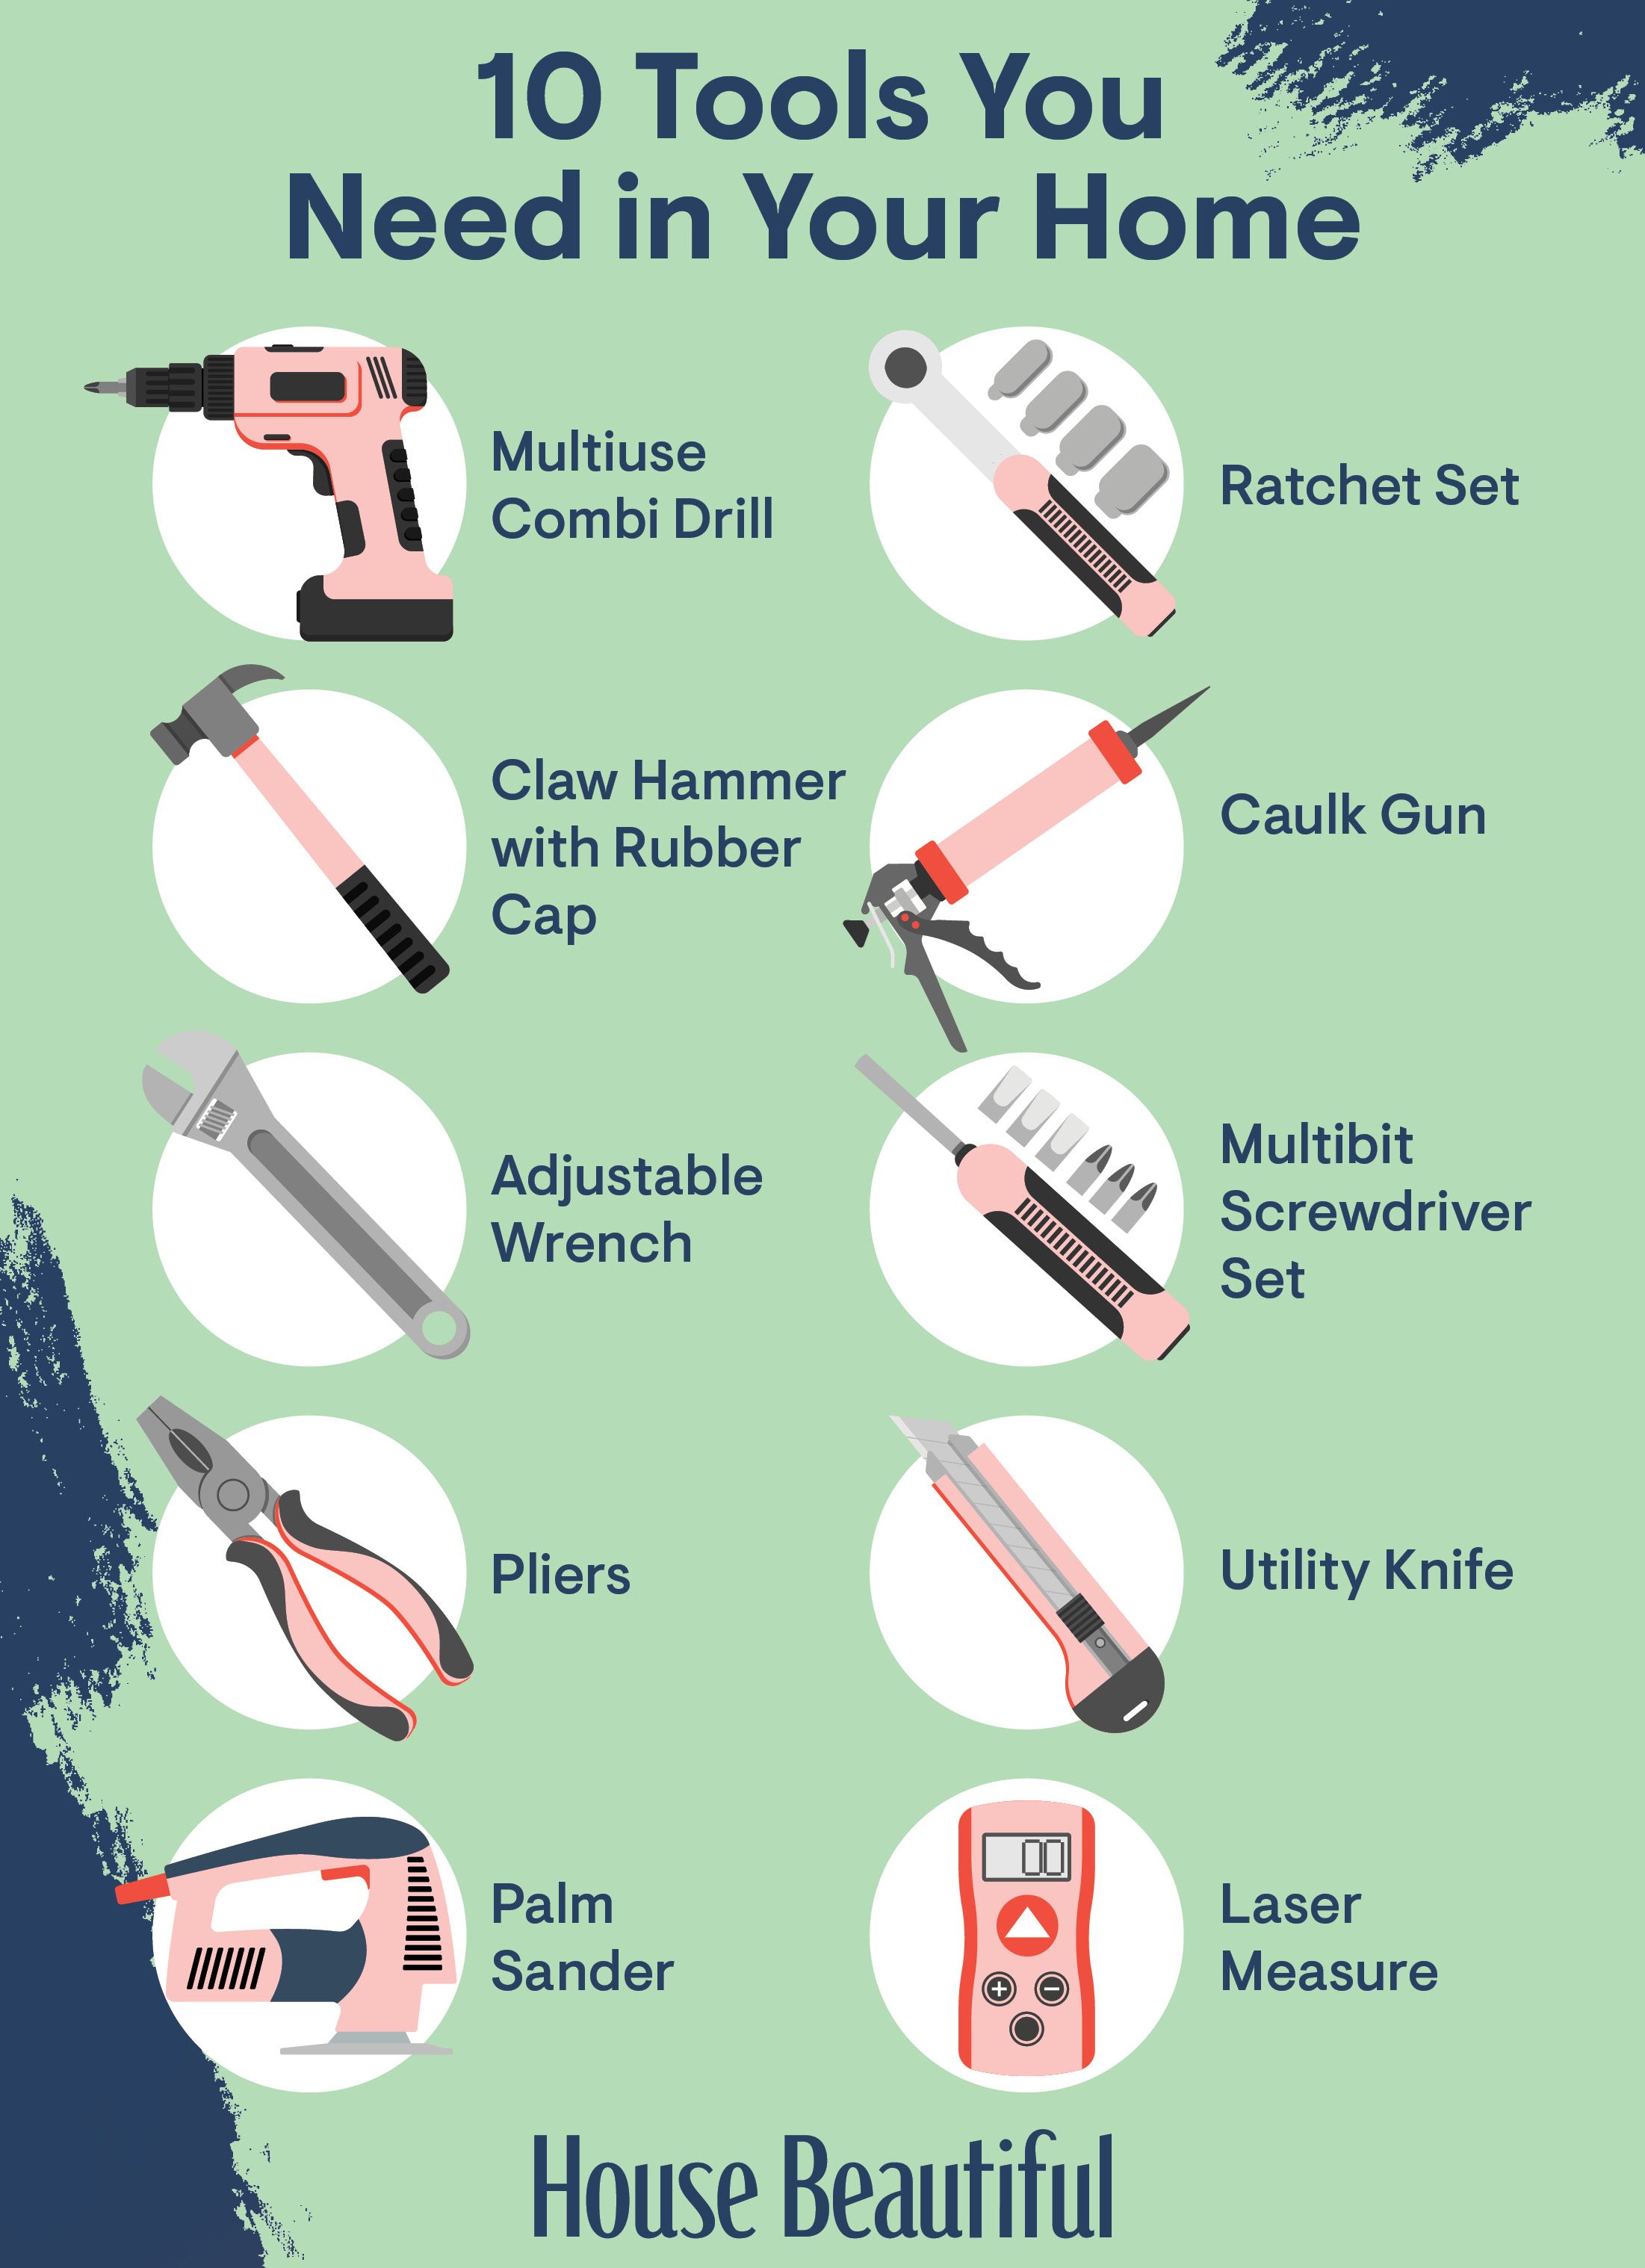 Common Household Items You Can Use as Tools